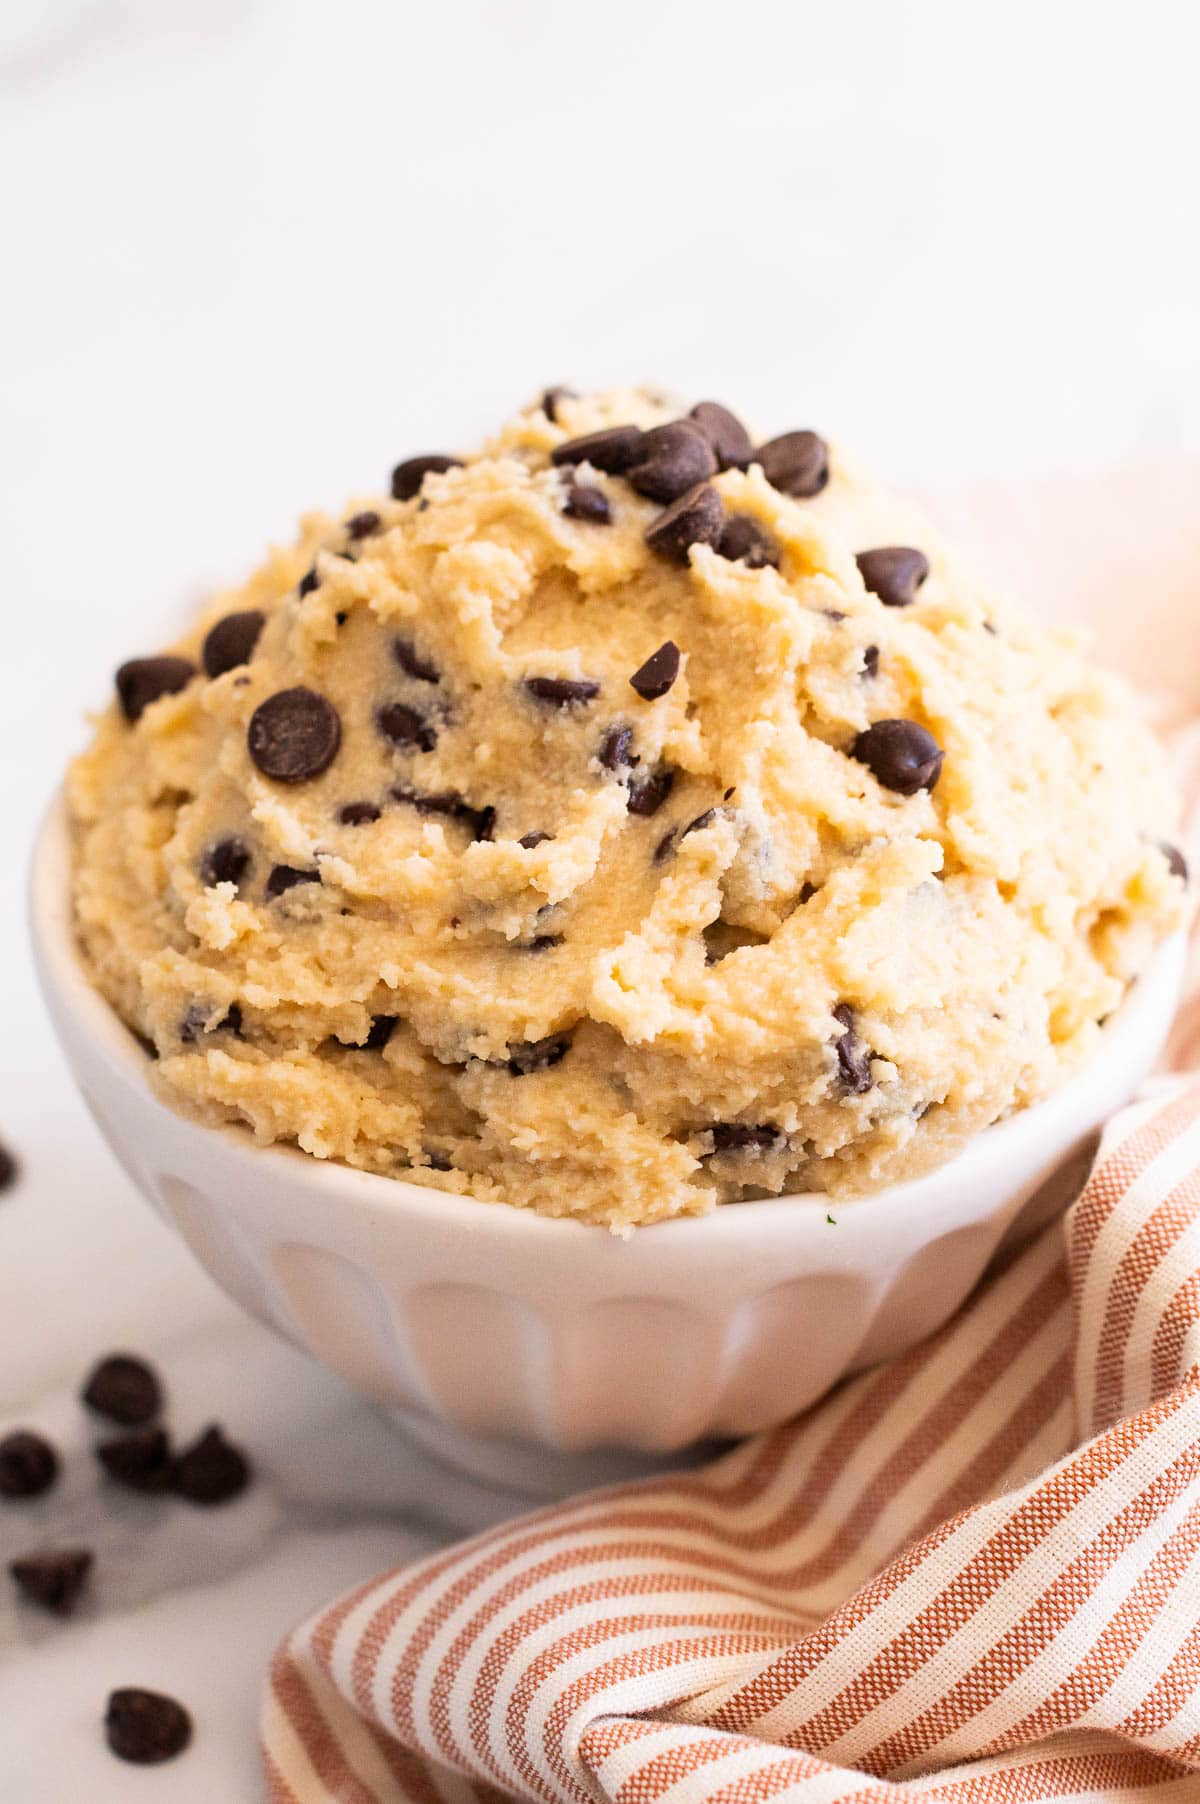 Cottage cheese cookie dough in a bowl. Linen towel and chocolate chips on a counter.